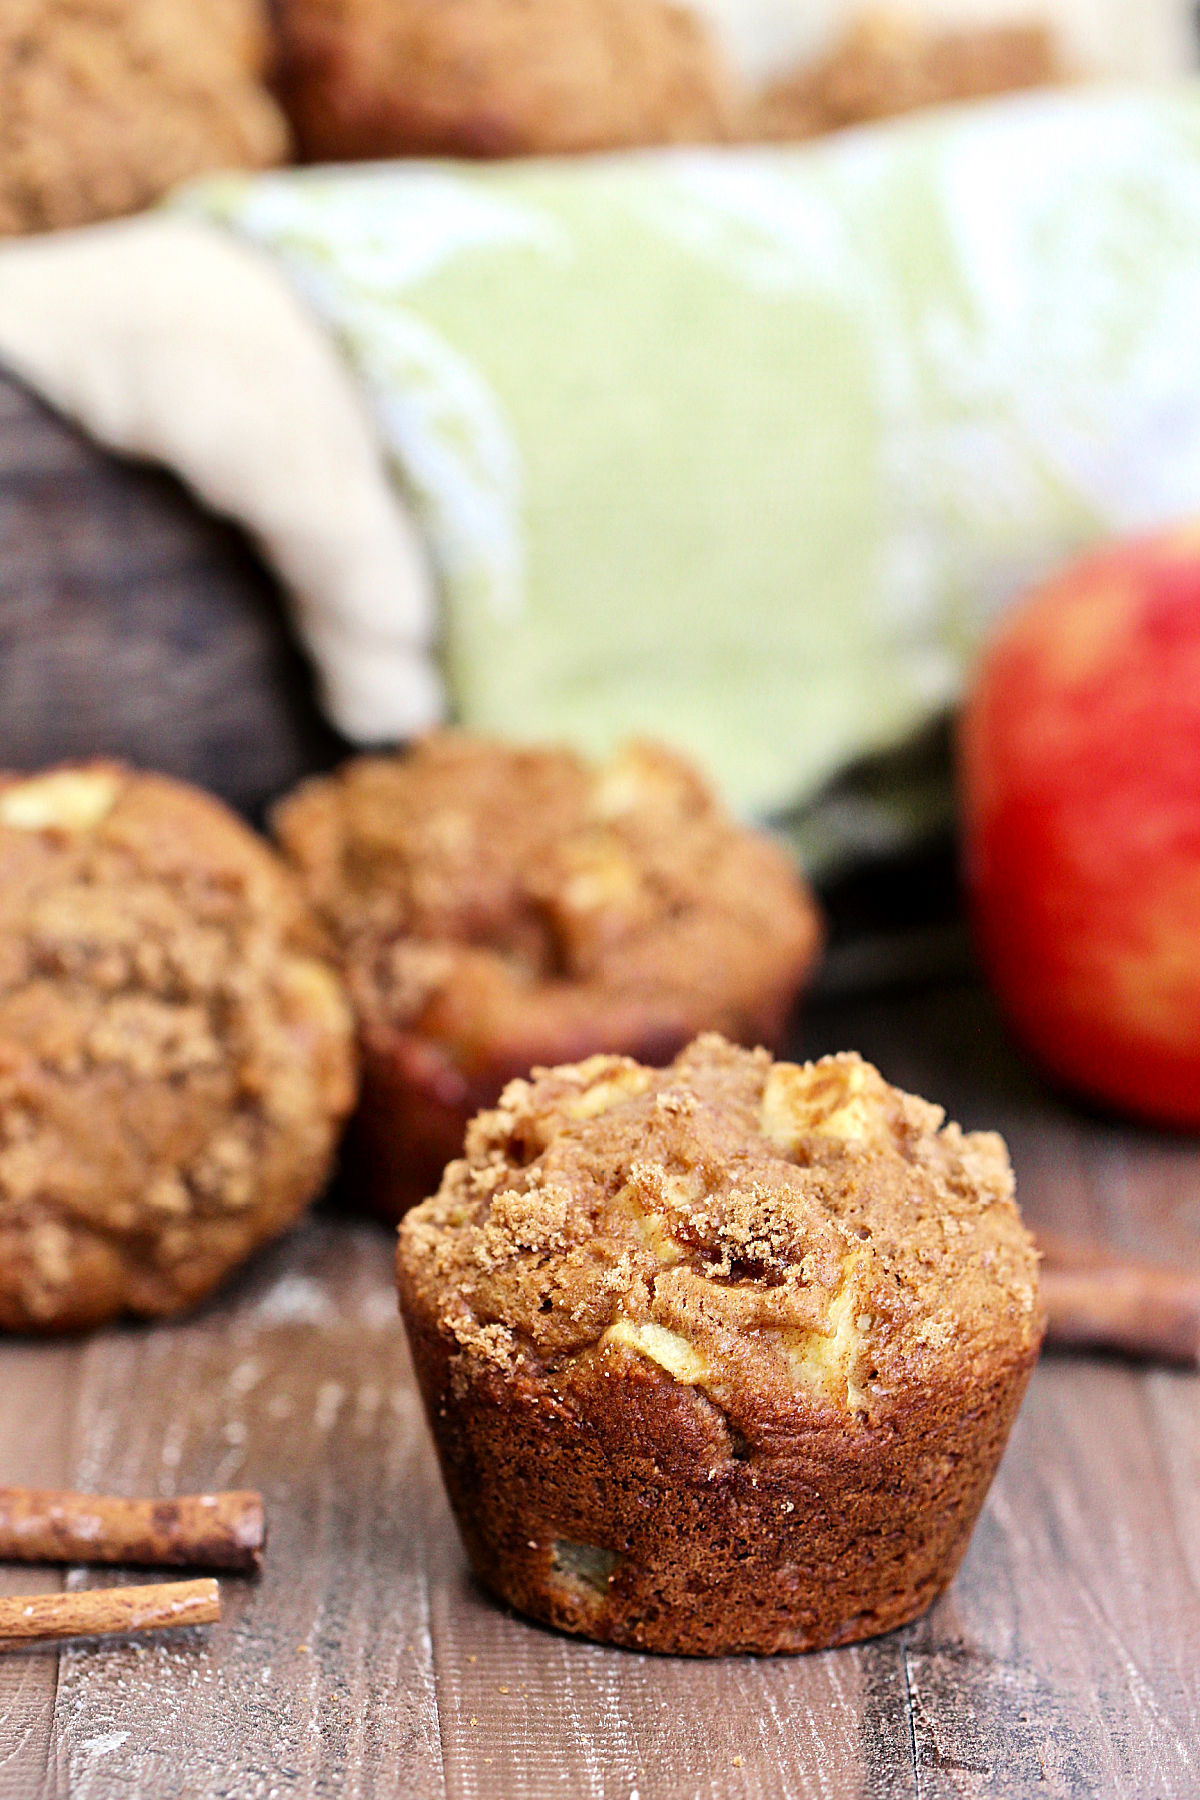 Single spiced apple muffin on a wooden board with more muffins in the background.